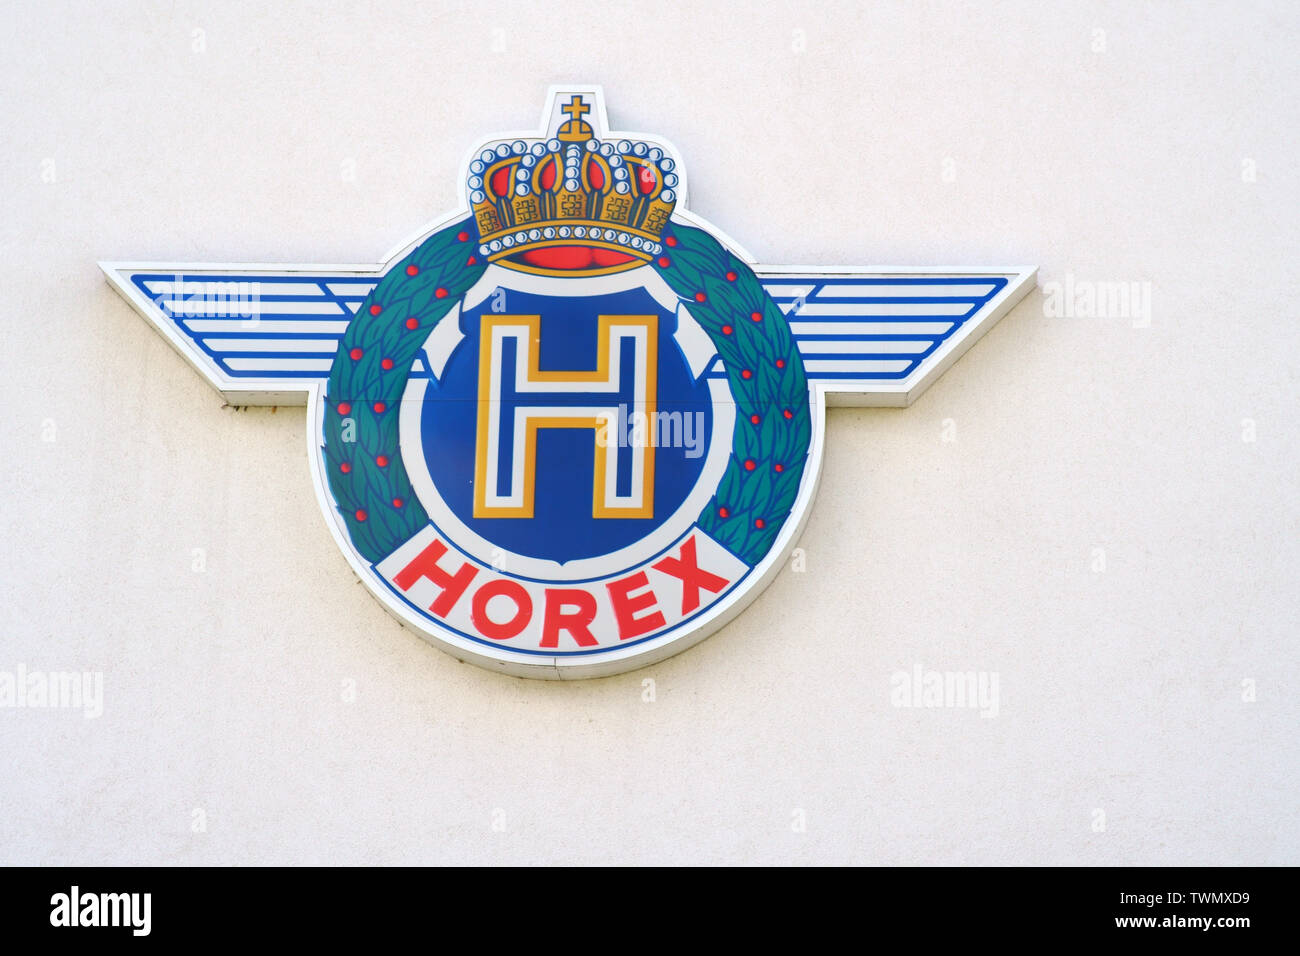 Bad Homburg, Germany - June 09, 2019: The coat of arms and logo of motorcycle manufacturer Horex at a museum on June 09, 2019 in Bad Homburg. Stock Photo